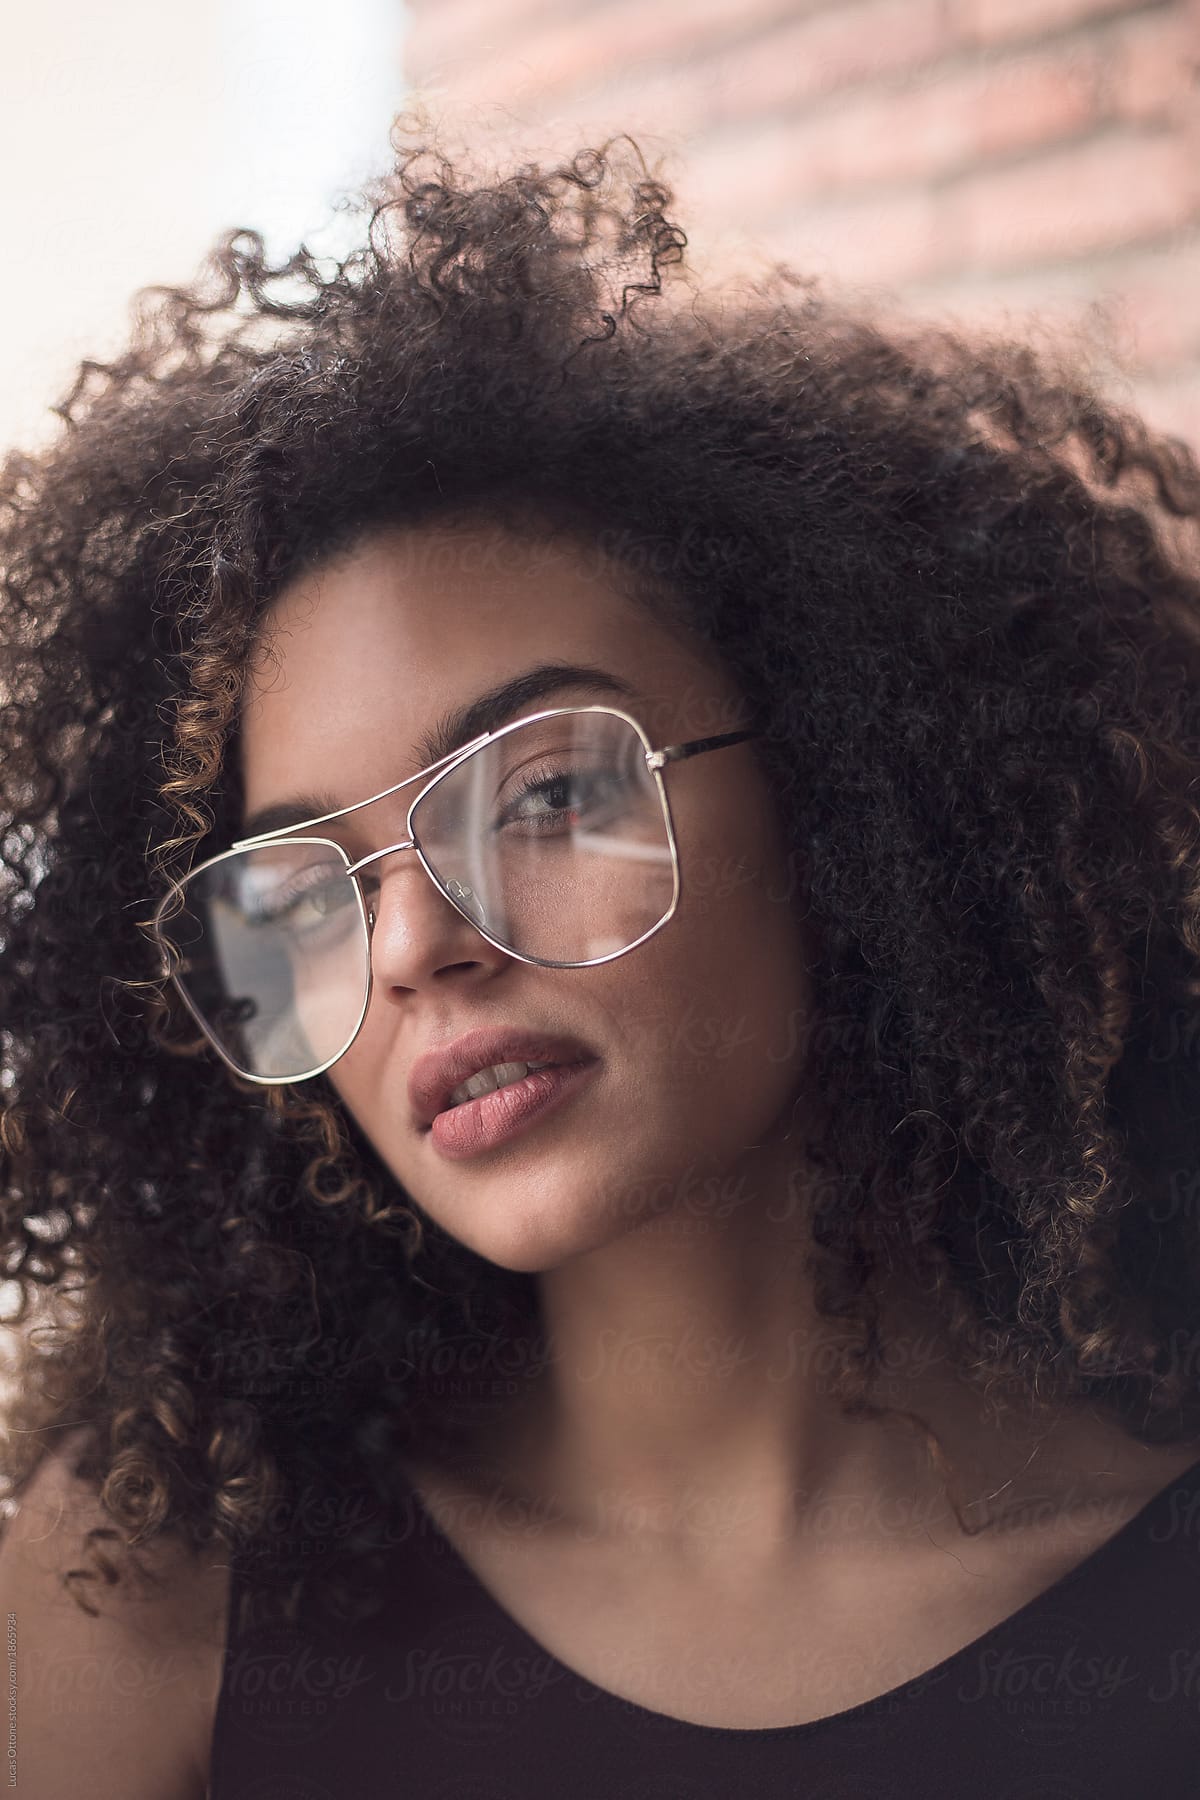 Attractive Woman With Afro Hair And Glasses By Stocksy Contributor Lucas Ottone Stocksy